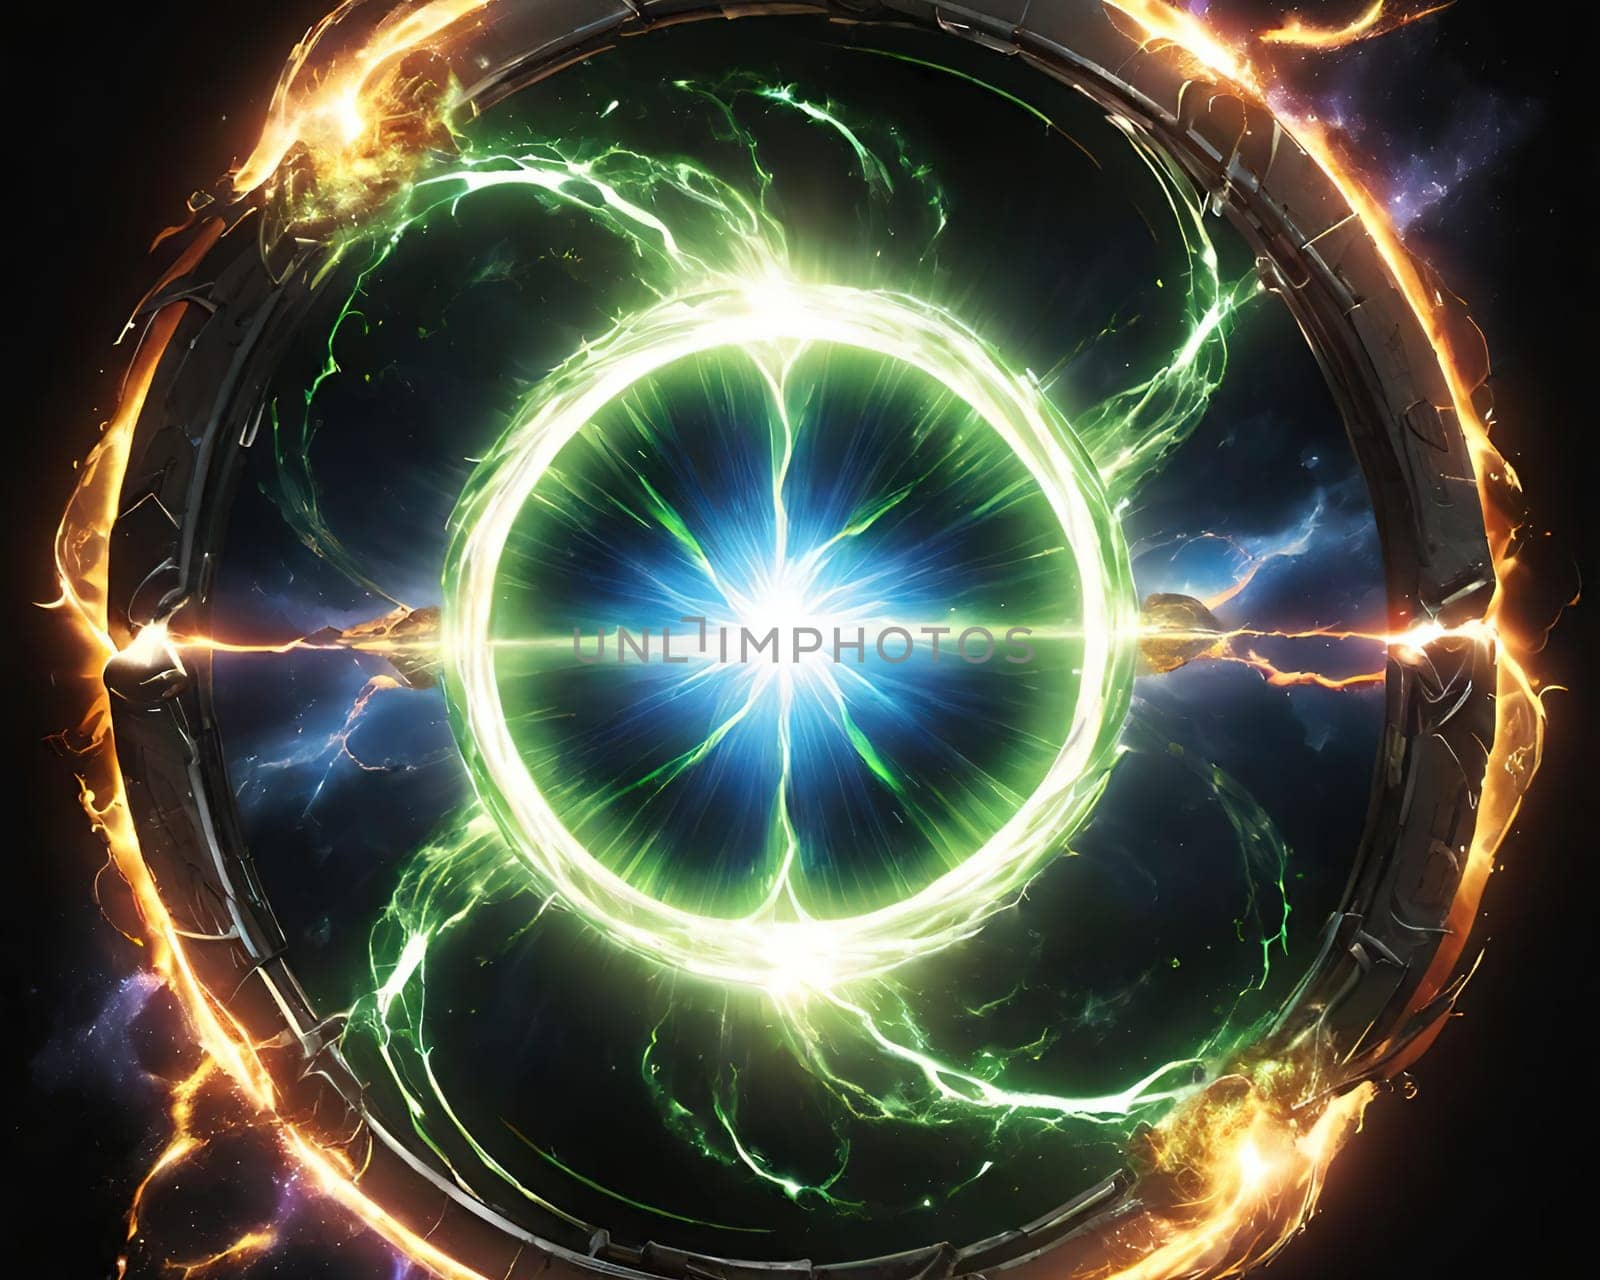 Futuristic abstract background for multiple projects such as science, music, art and technology. Circular energy explosion.Fiery circle on a dark background, computer generated abstract background.